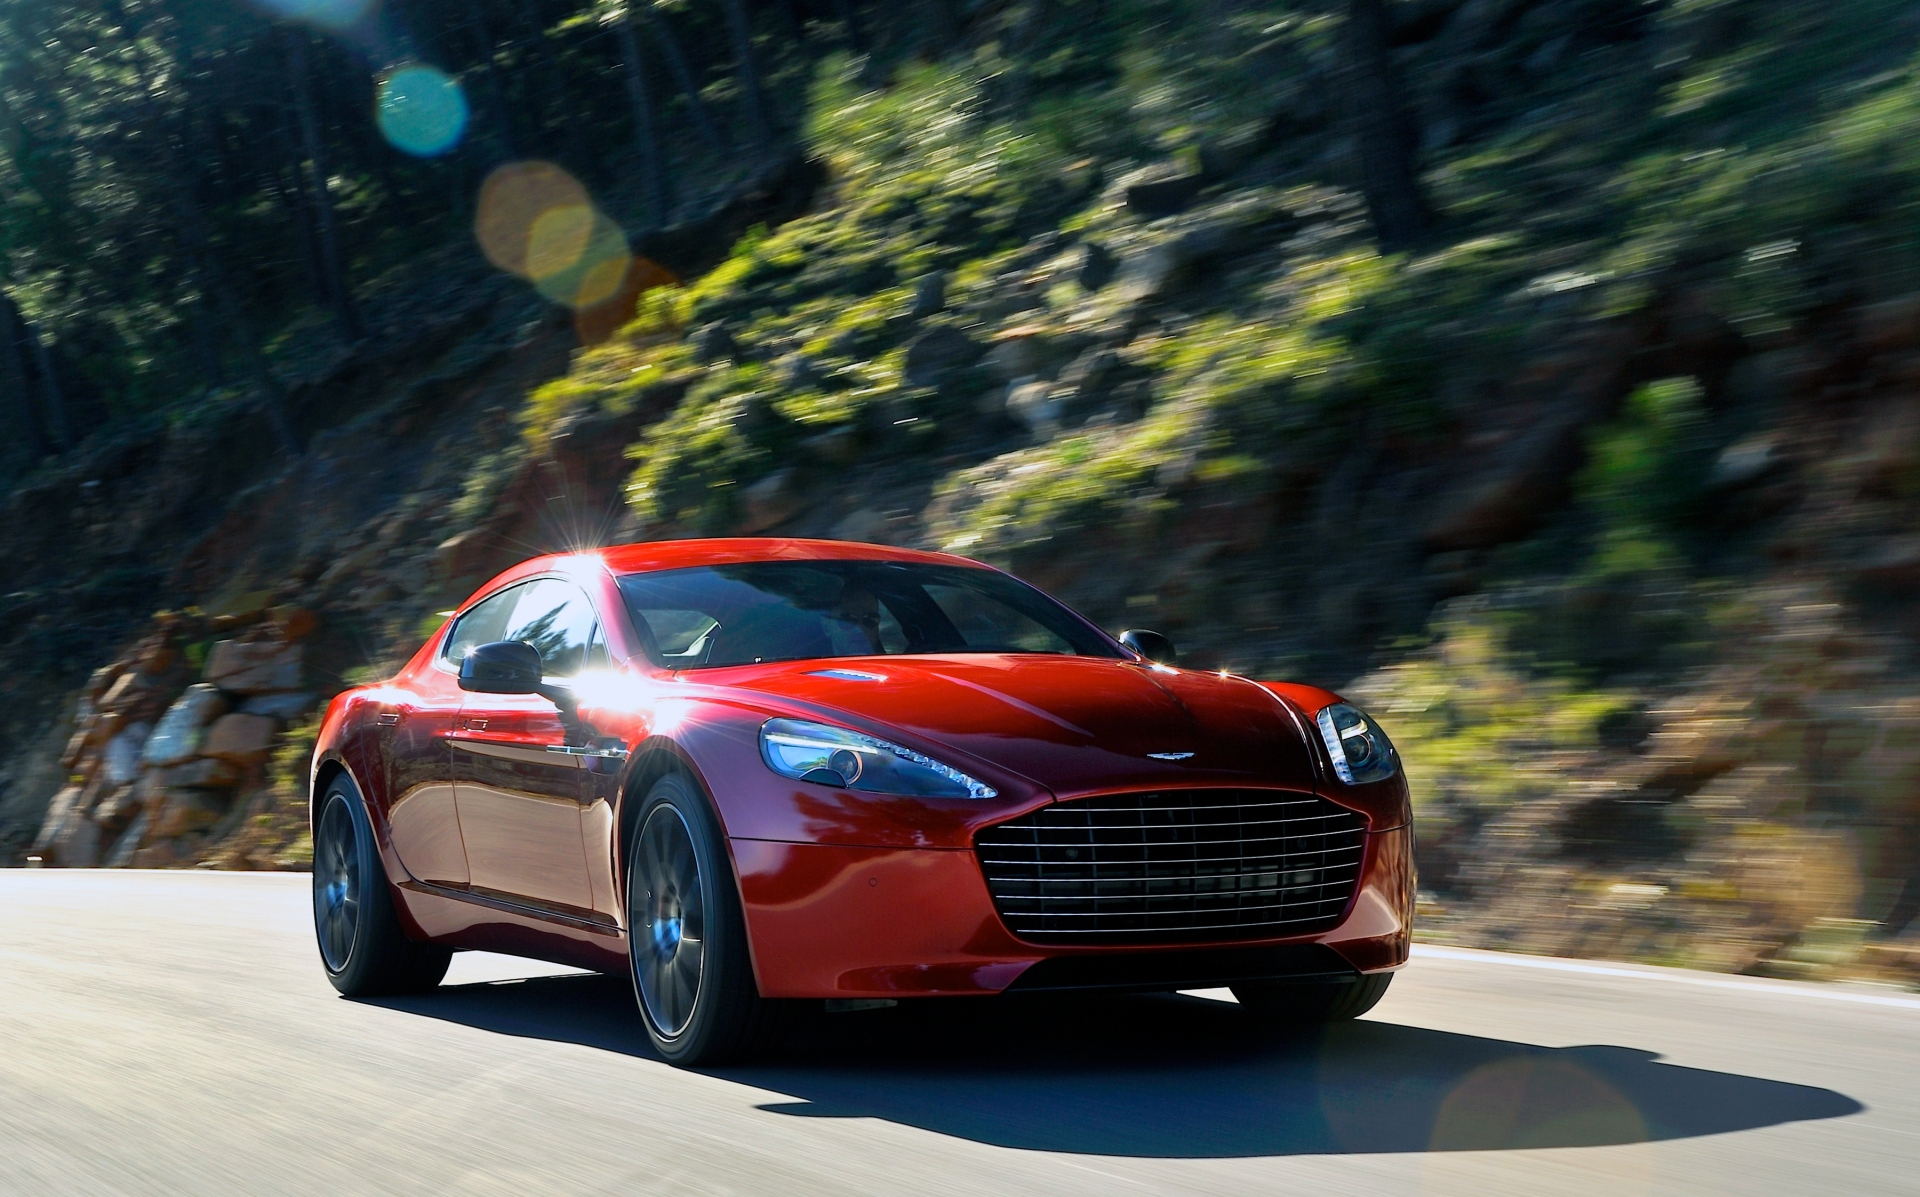 2017 Aston Martin Rapide S - Red Exterior - Front Side Quarter - Dynamic